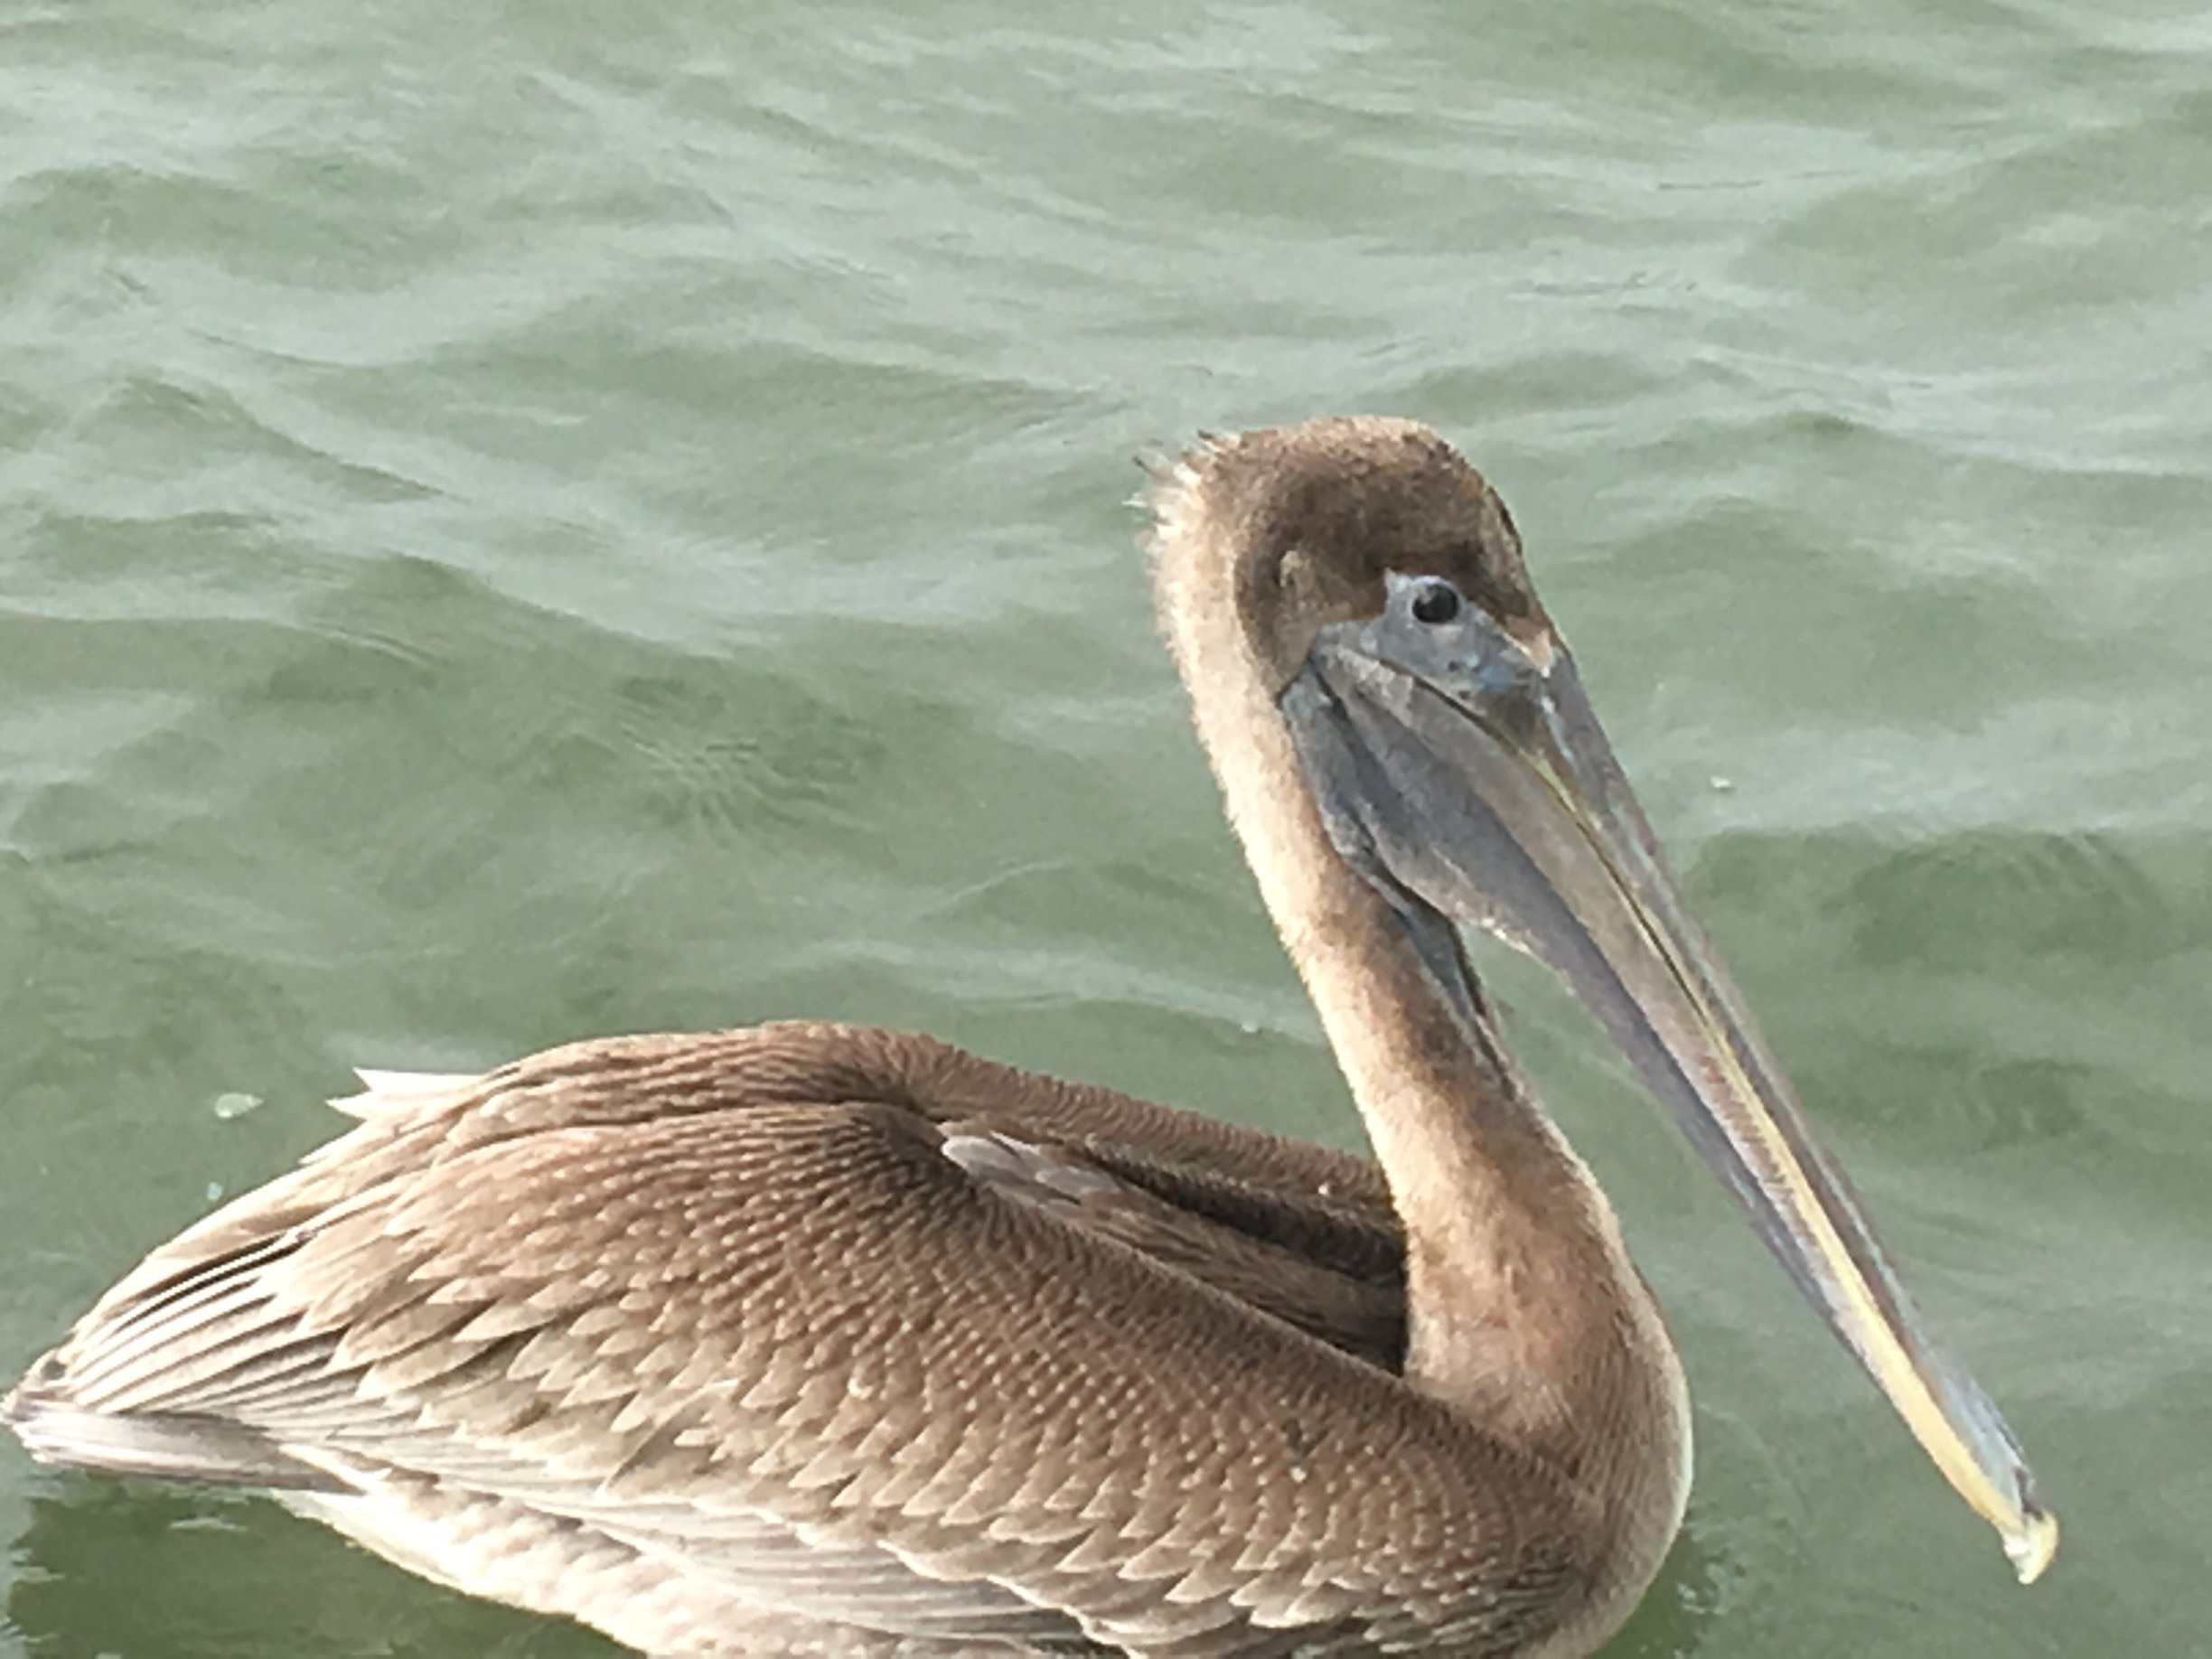 We were out for a glorious day of inshore fishing, when were visited by a curious, and hungry, brown pelican on the Ossabow Sound,GA.!!